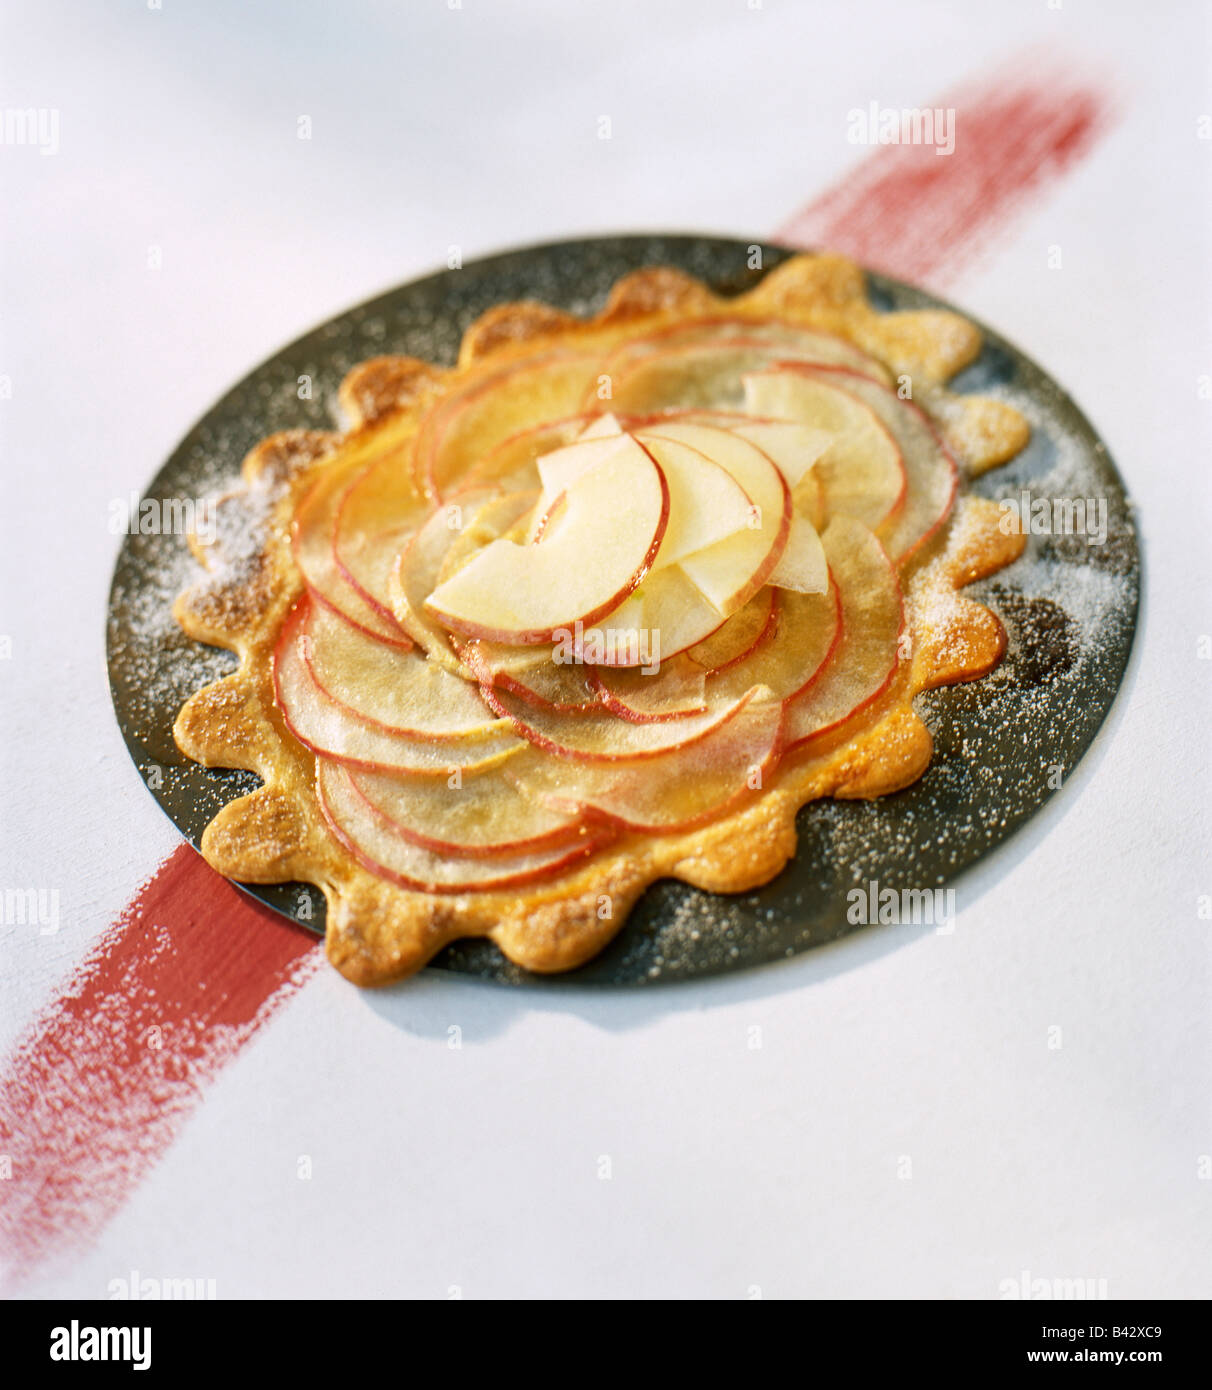 apple chaudfroid with hazelnut oil Stock Photo